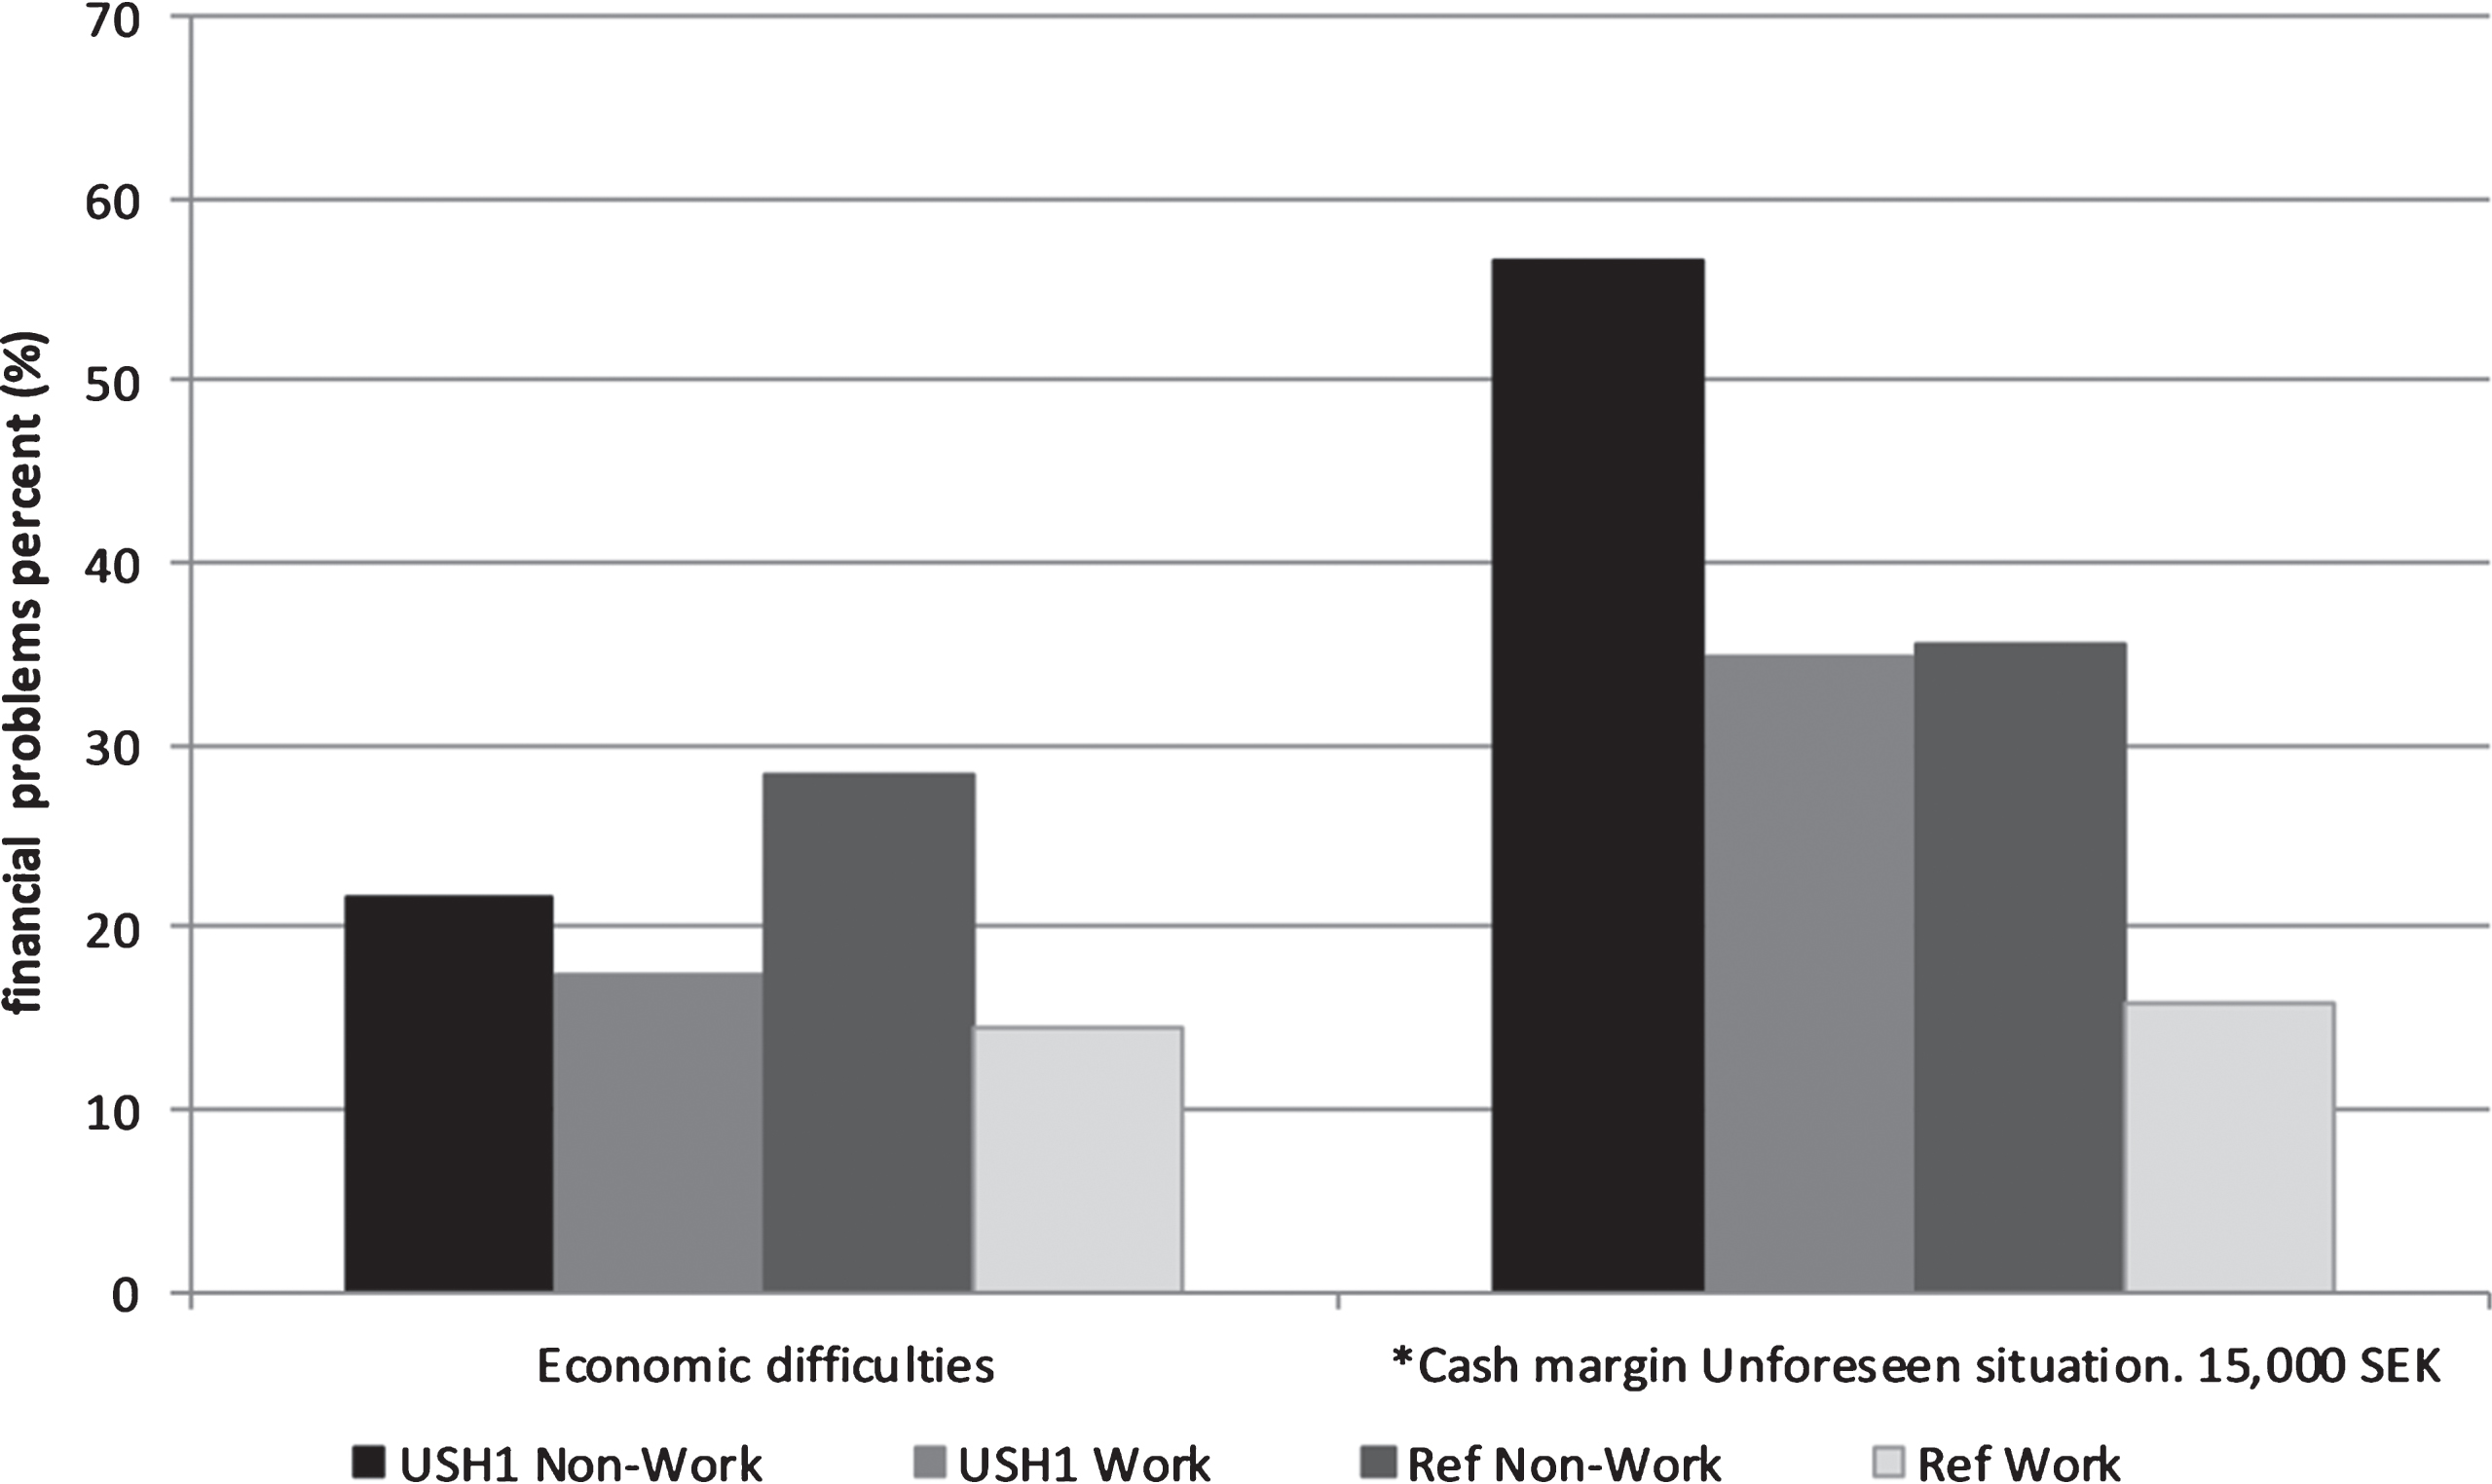 Financial situation variables in the USH1 non-work, USH1 work, Ref. non-work and Ref. work groups (%), * = significant (p < 0.05) difference between USH1 work and USH1 non-work groups.